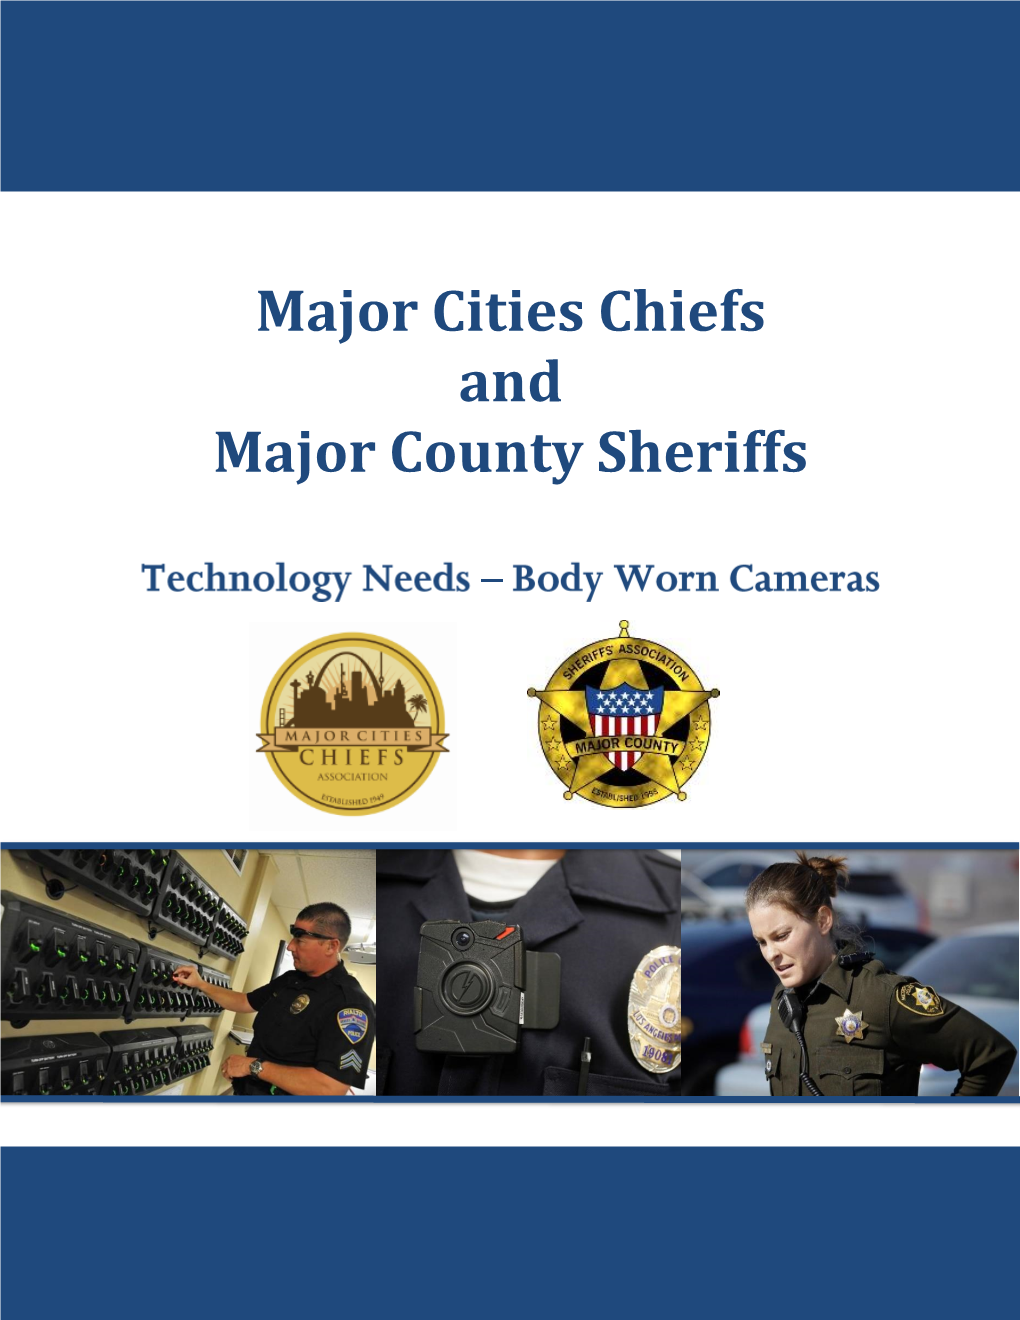 Major Cities Chiefs and Major County Sheriffs